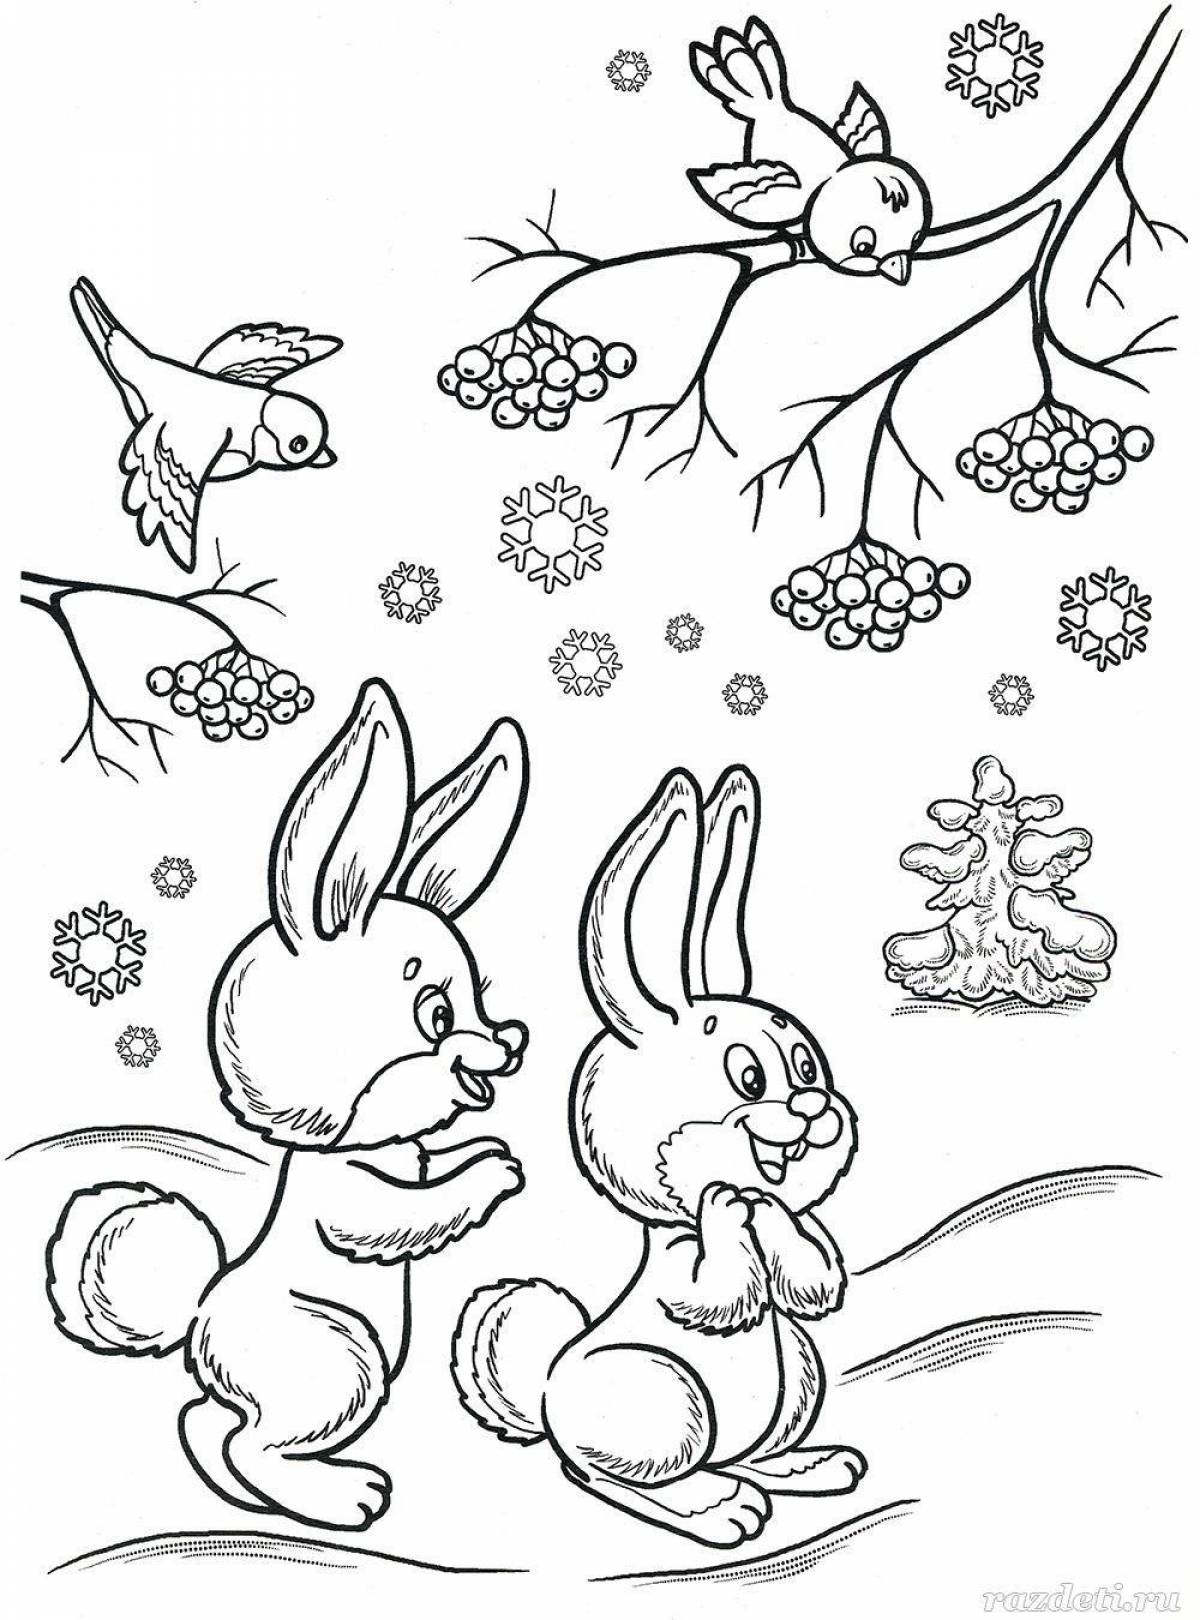 Colorful Christmas bunny coloring book